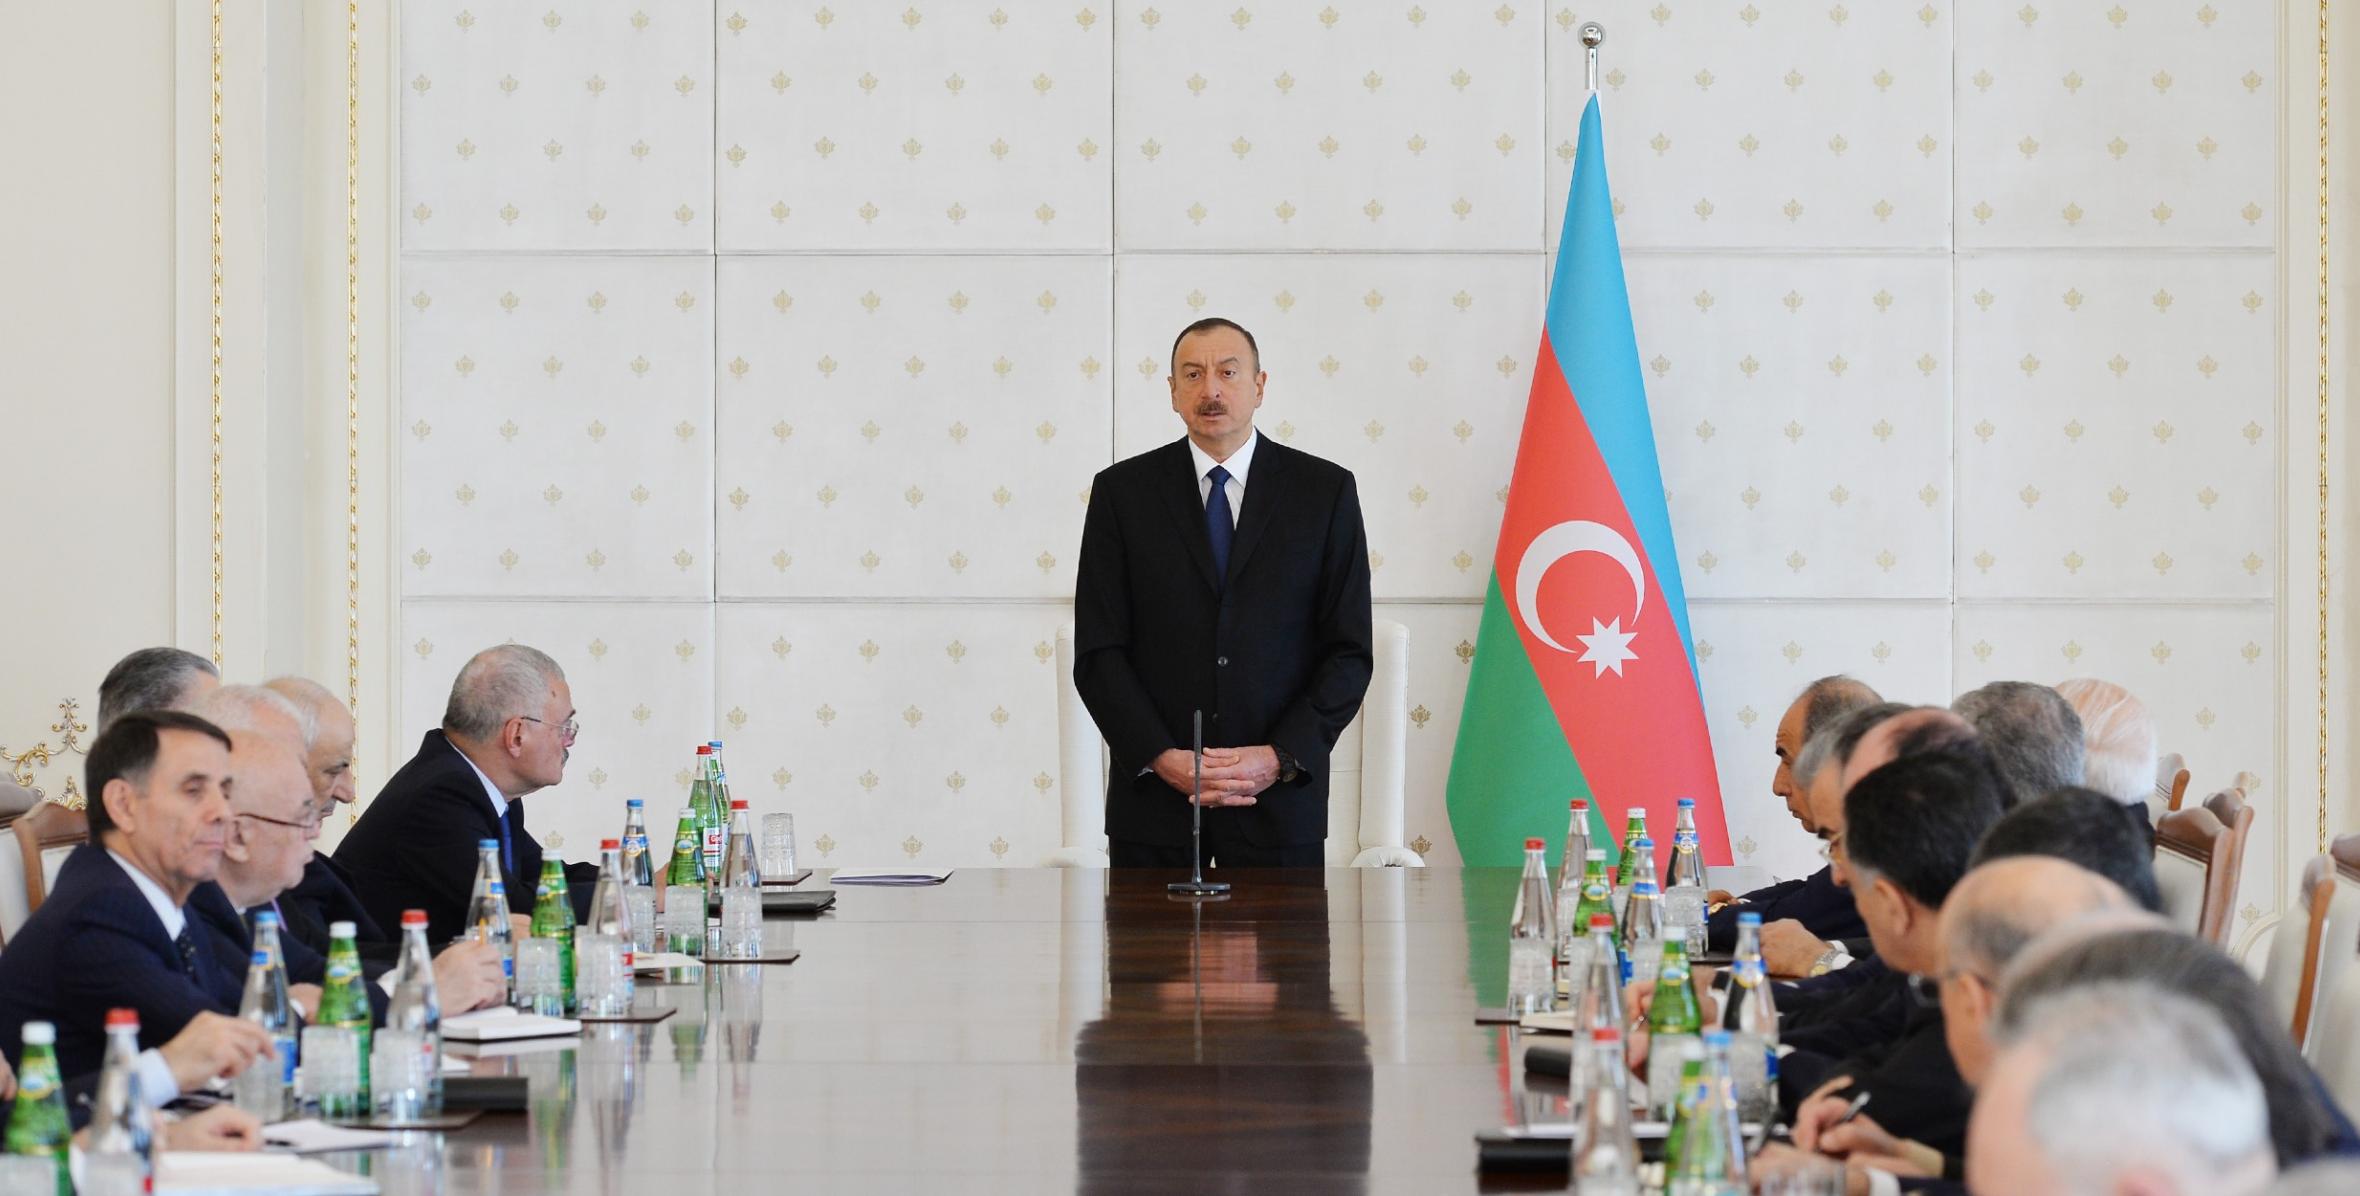 Opening speech by Ilham Aliyev at the meeting of the Cabinet of Ministers dedicated to the results of the first quarter of 2016 and objectives for the future